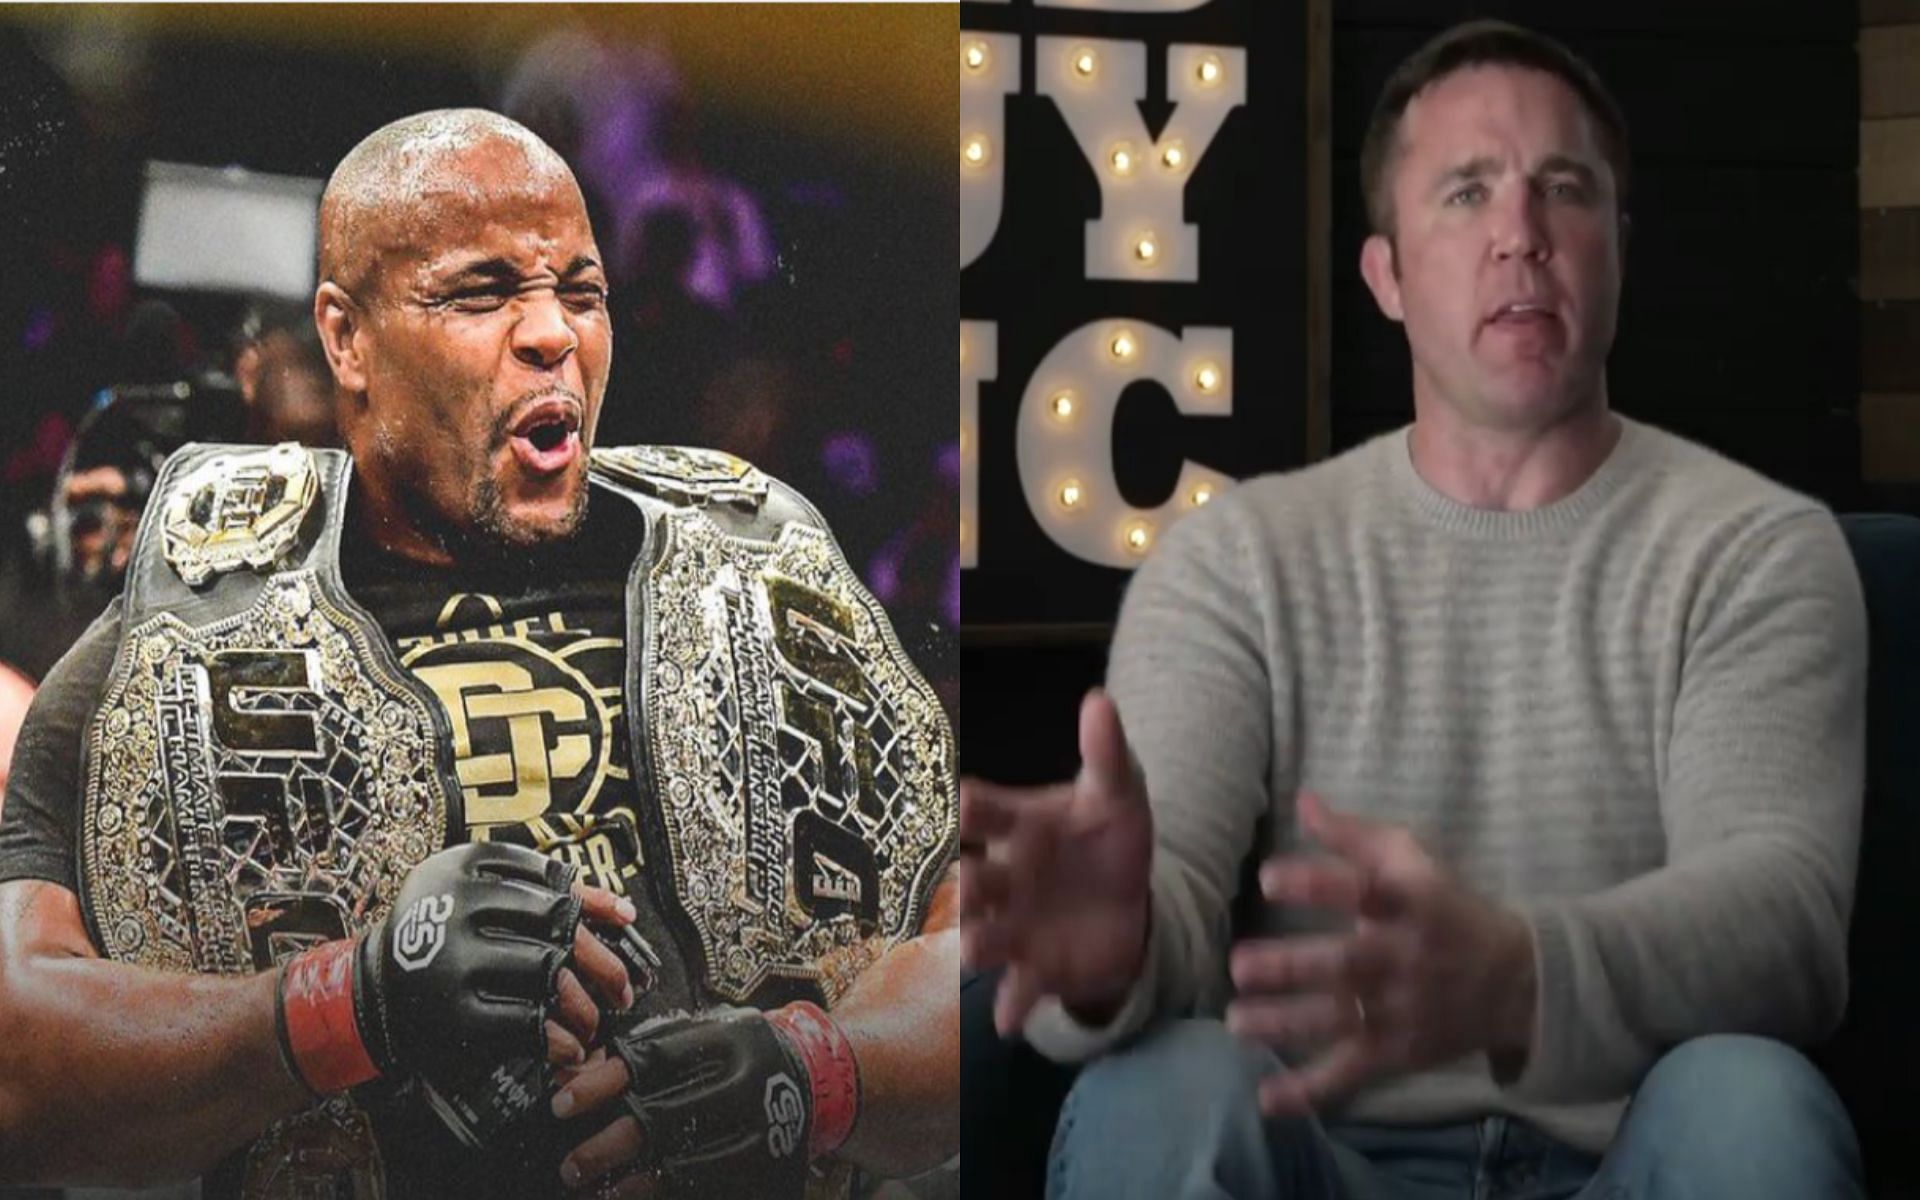 Daniel Cormier (left) and Chael Sonnen (right) [Images Courtesy: @dc_mma and @sonnench on Instagram]